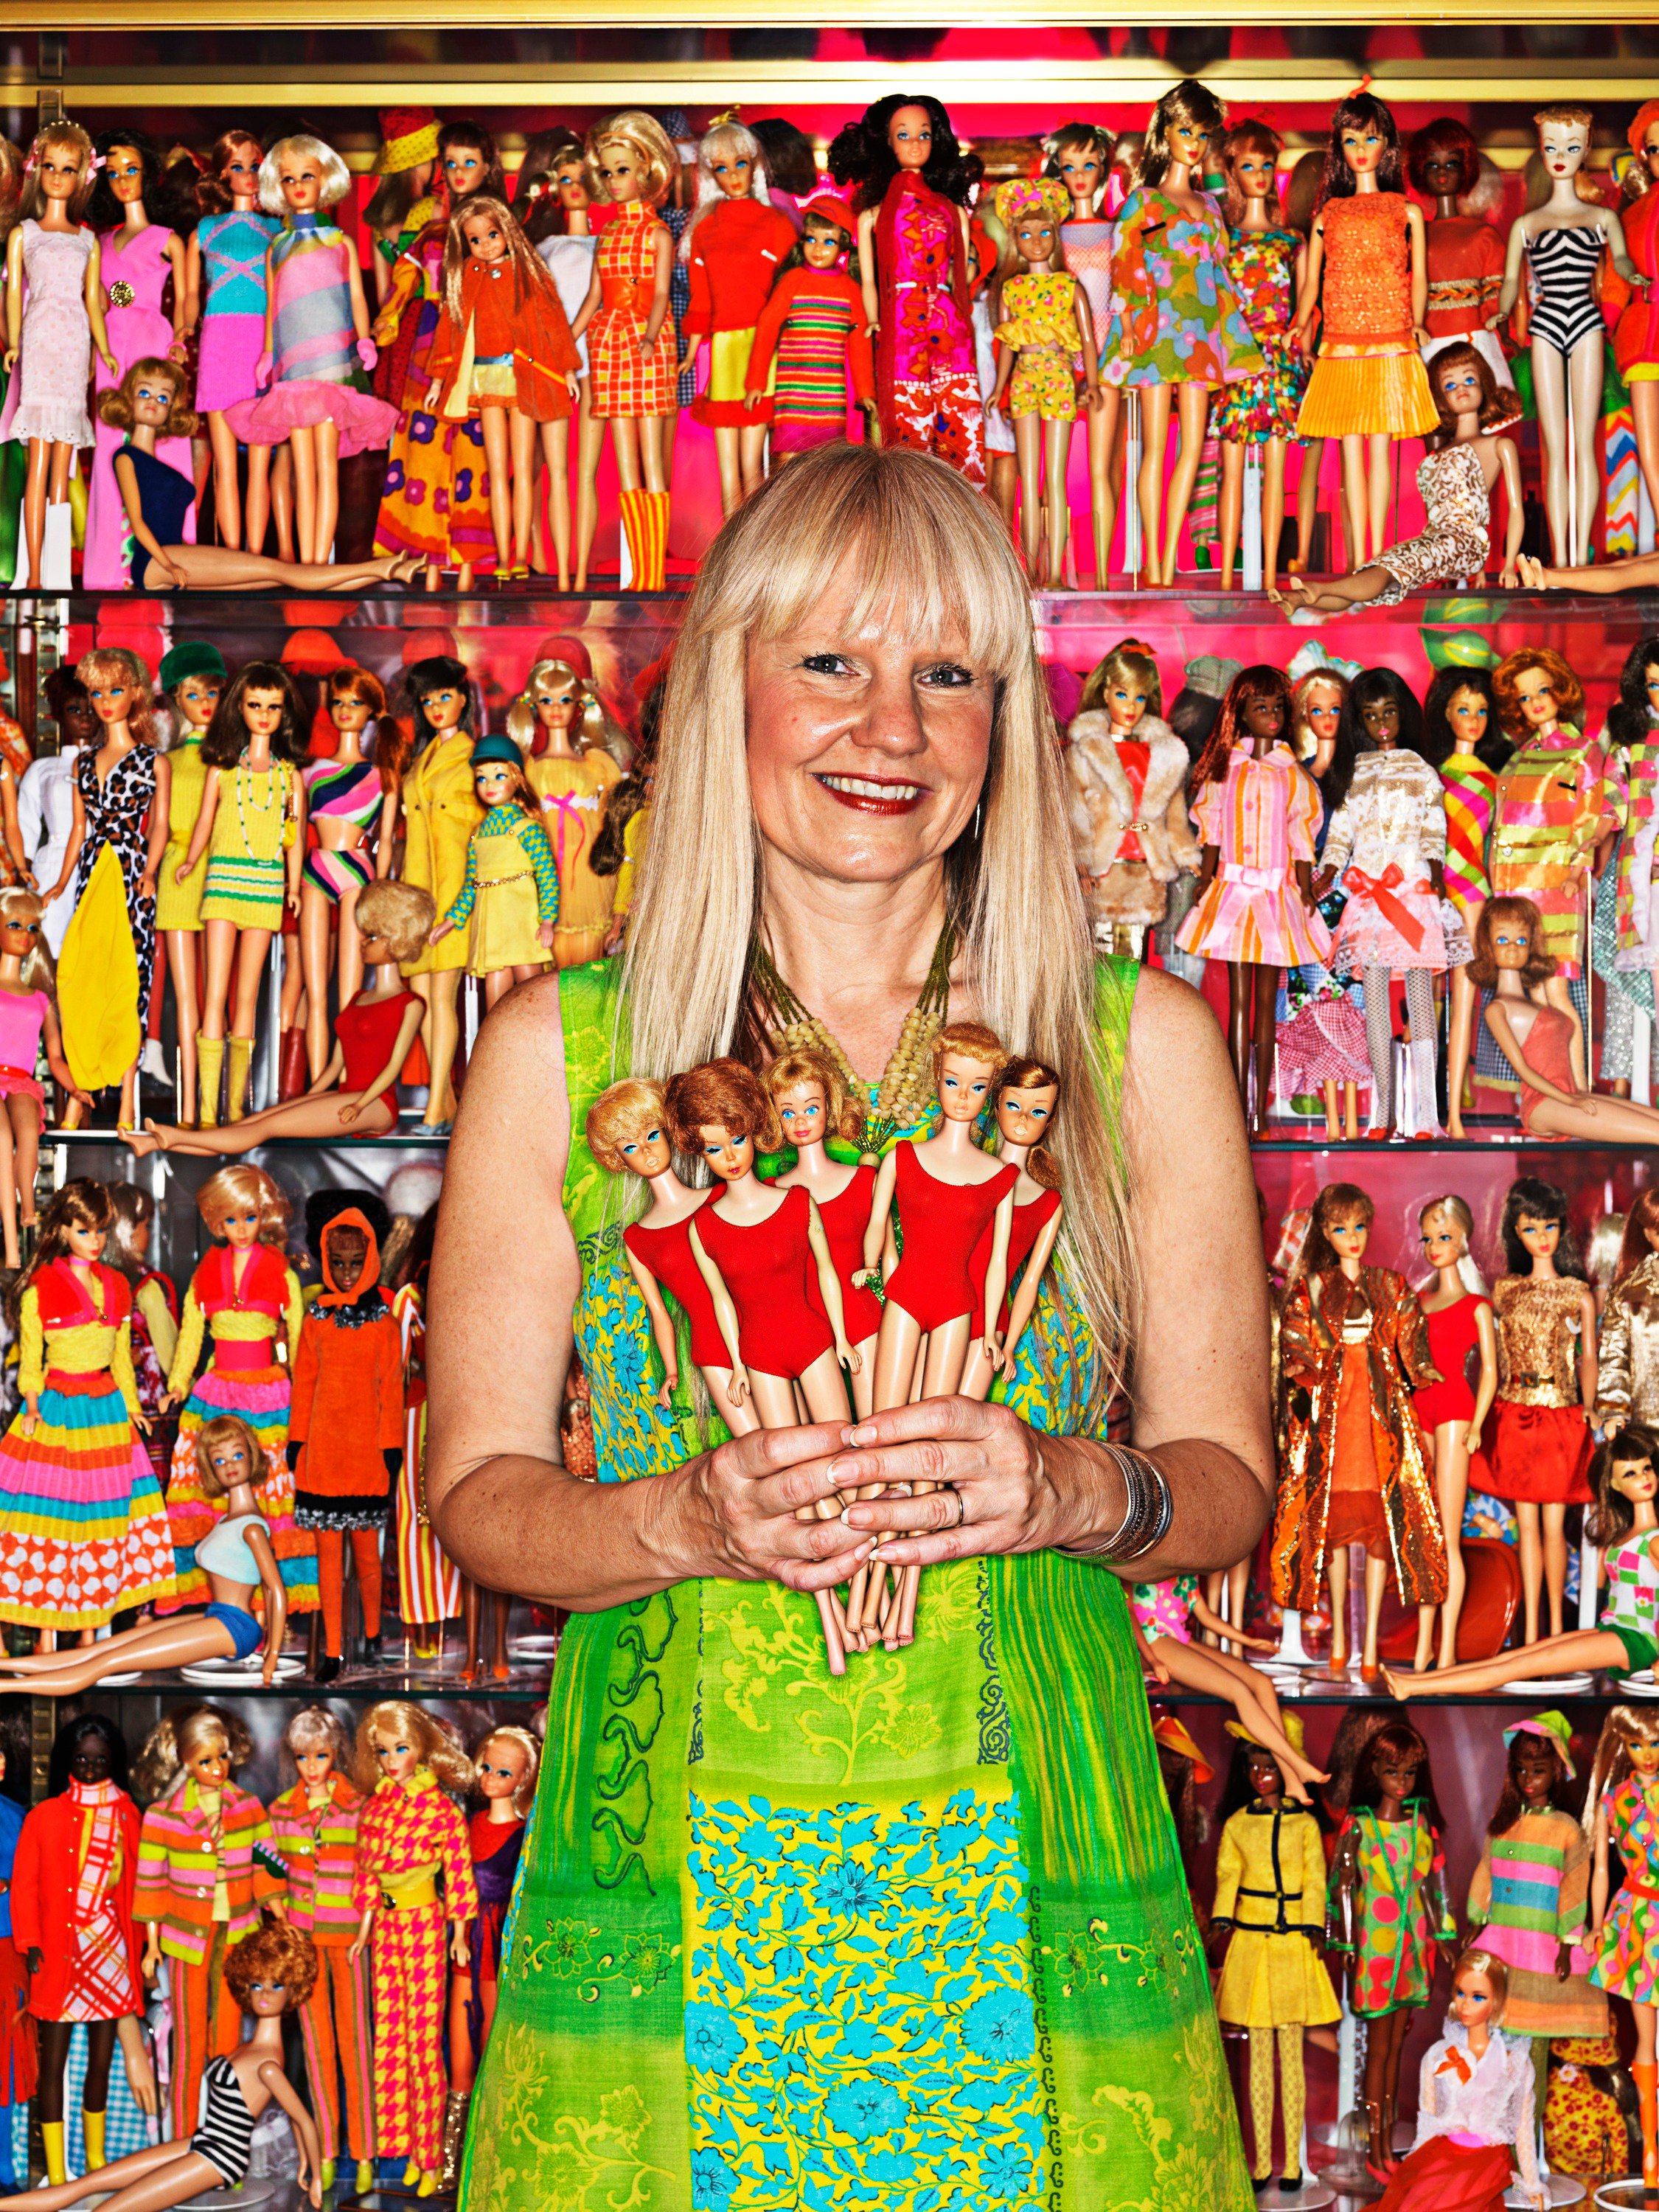 Haas Uitrusting Pasen Guinness World Records on Twitter: "Bettina Dorfmann has the largest #Barbie  collection with 15,000 different dolls, that she has collected since 1993.  https://t.co/DzFd0PCB2h" / Twitter